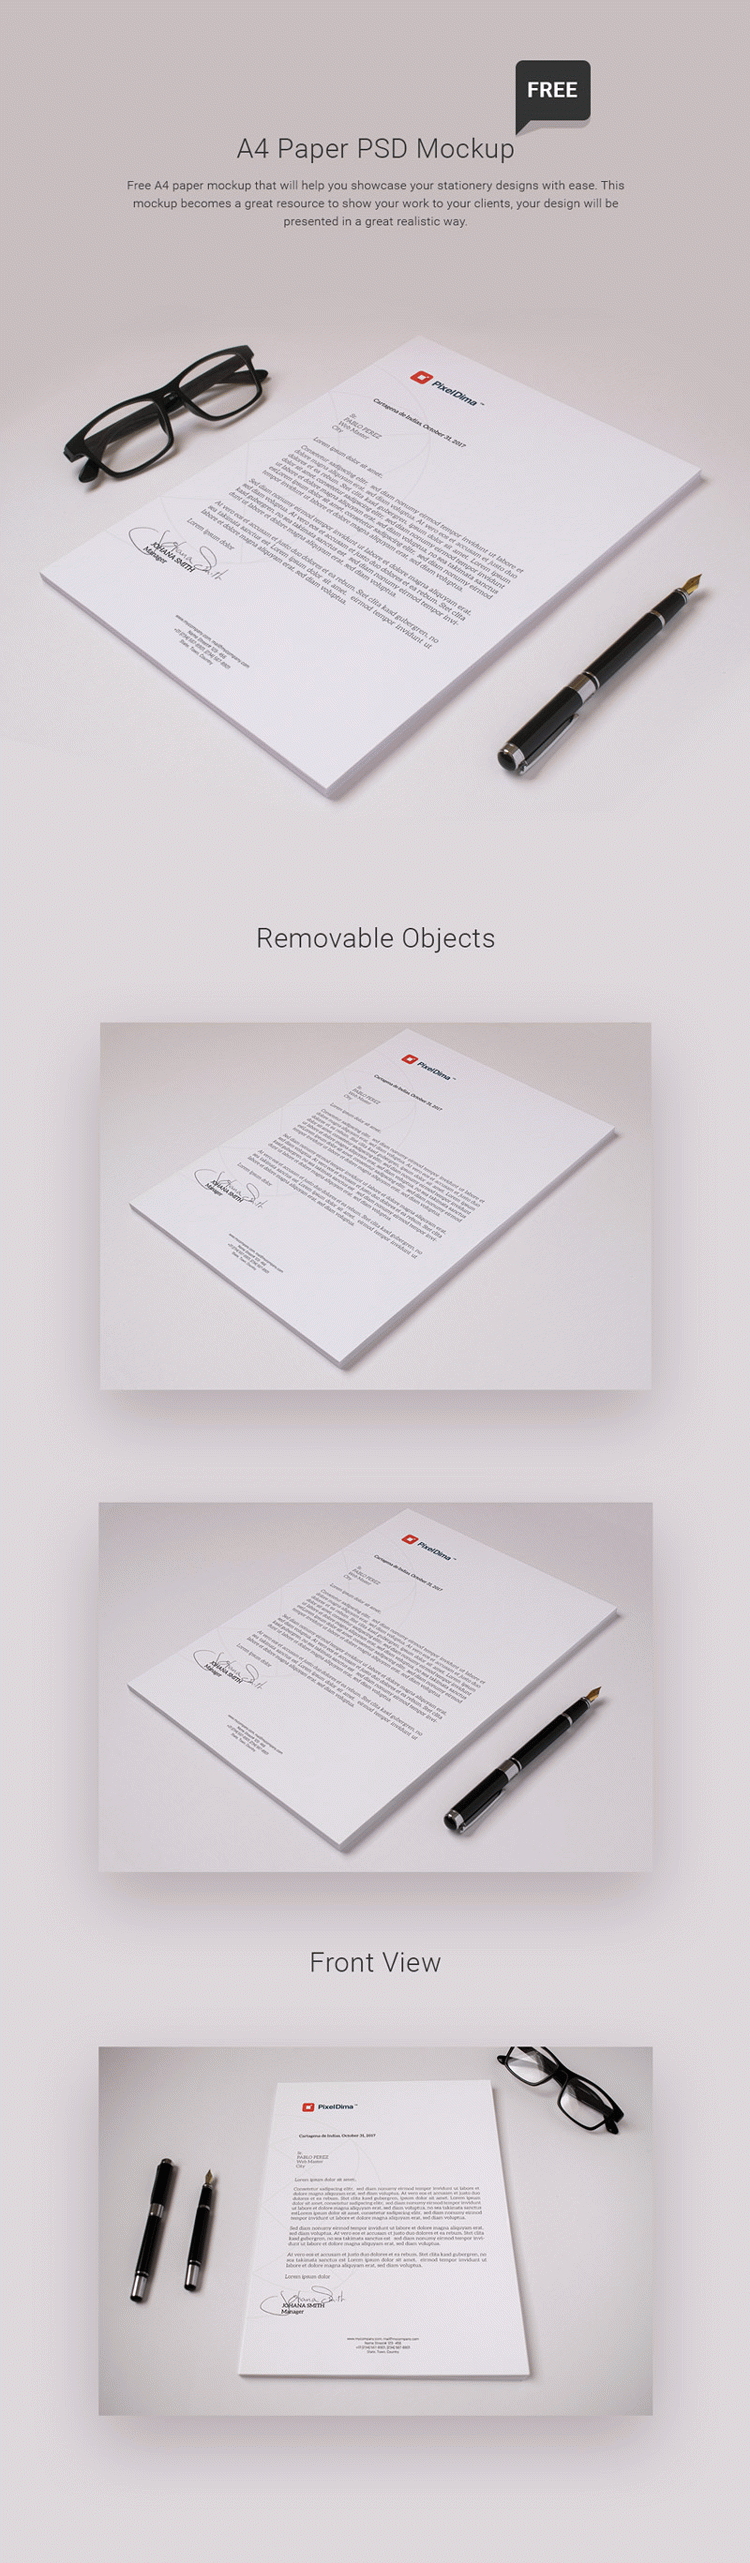 Free A4 Paper Mockup PSD Template